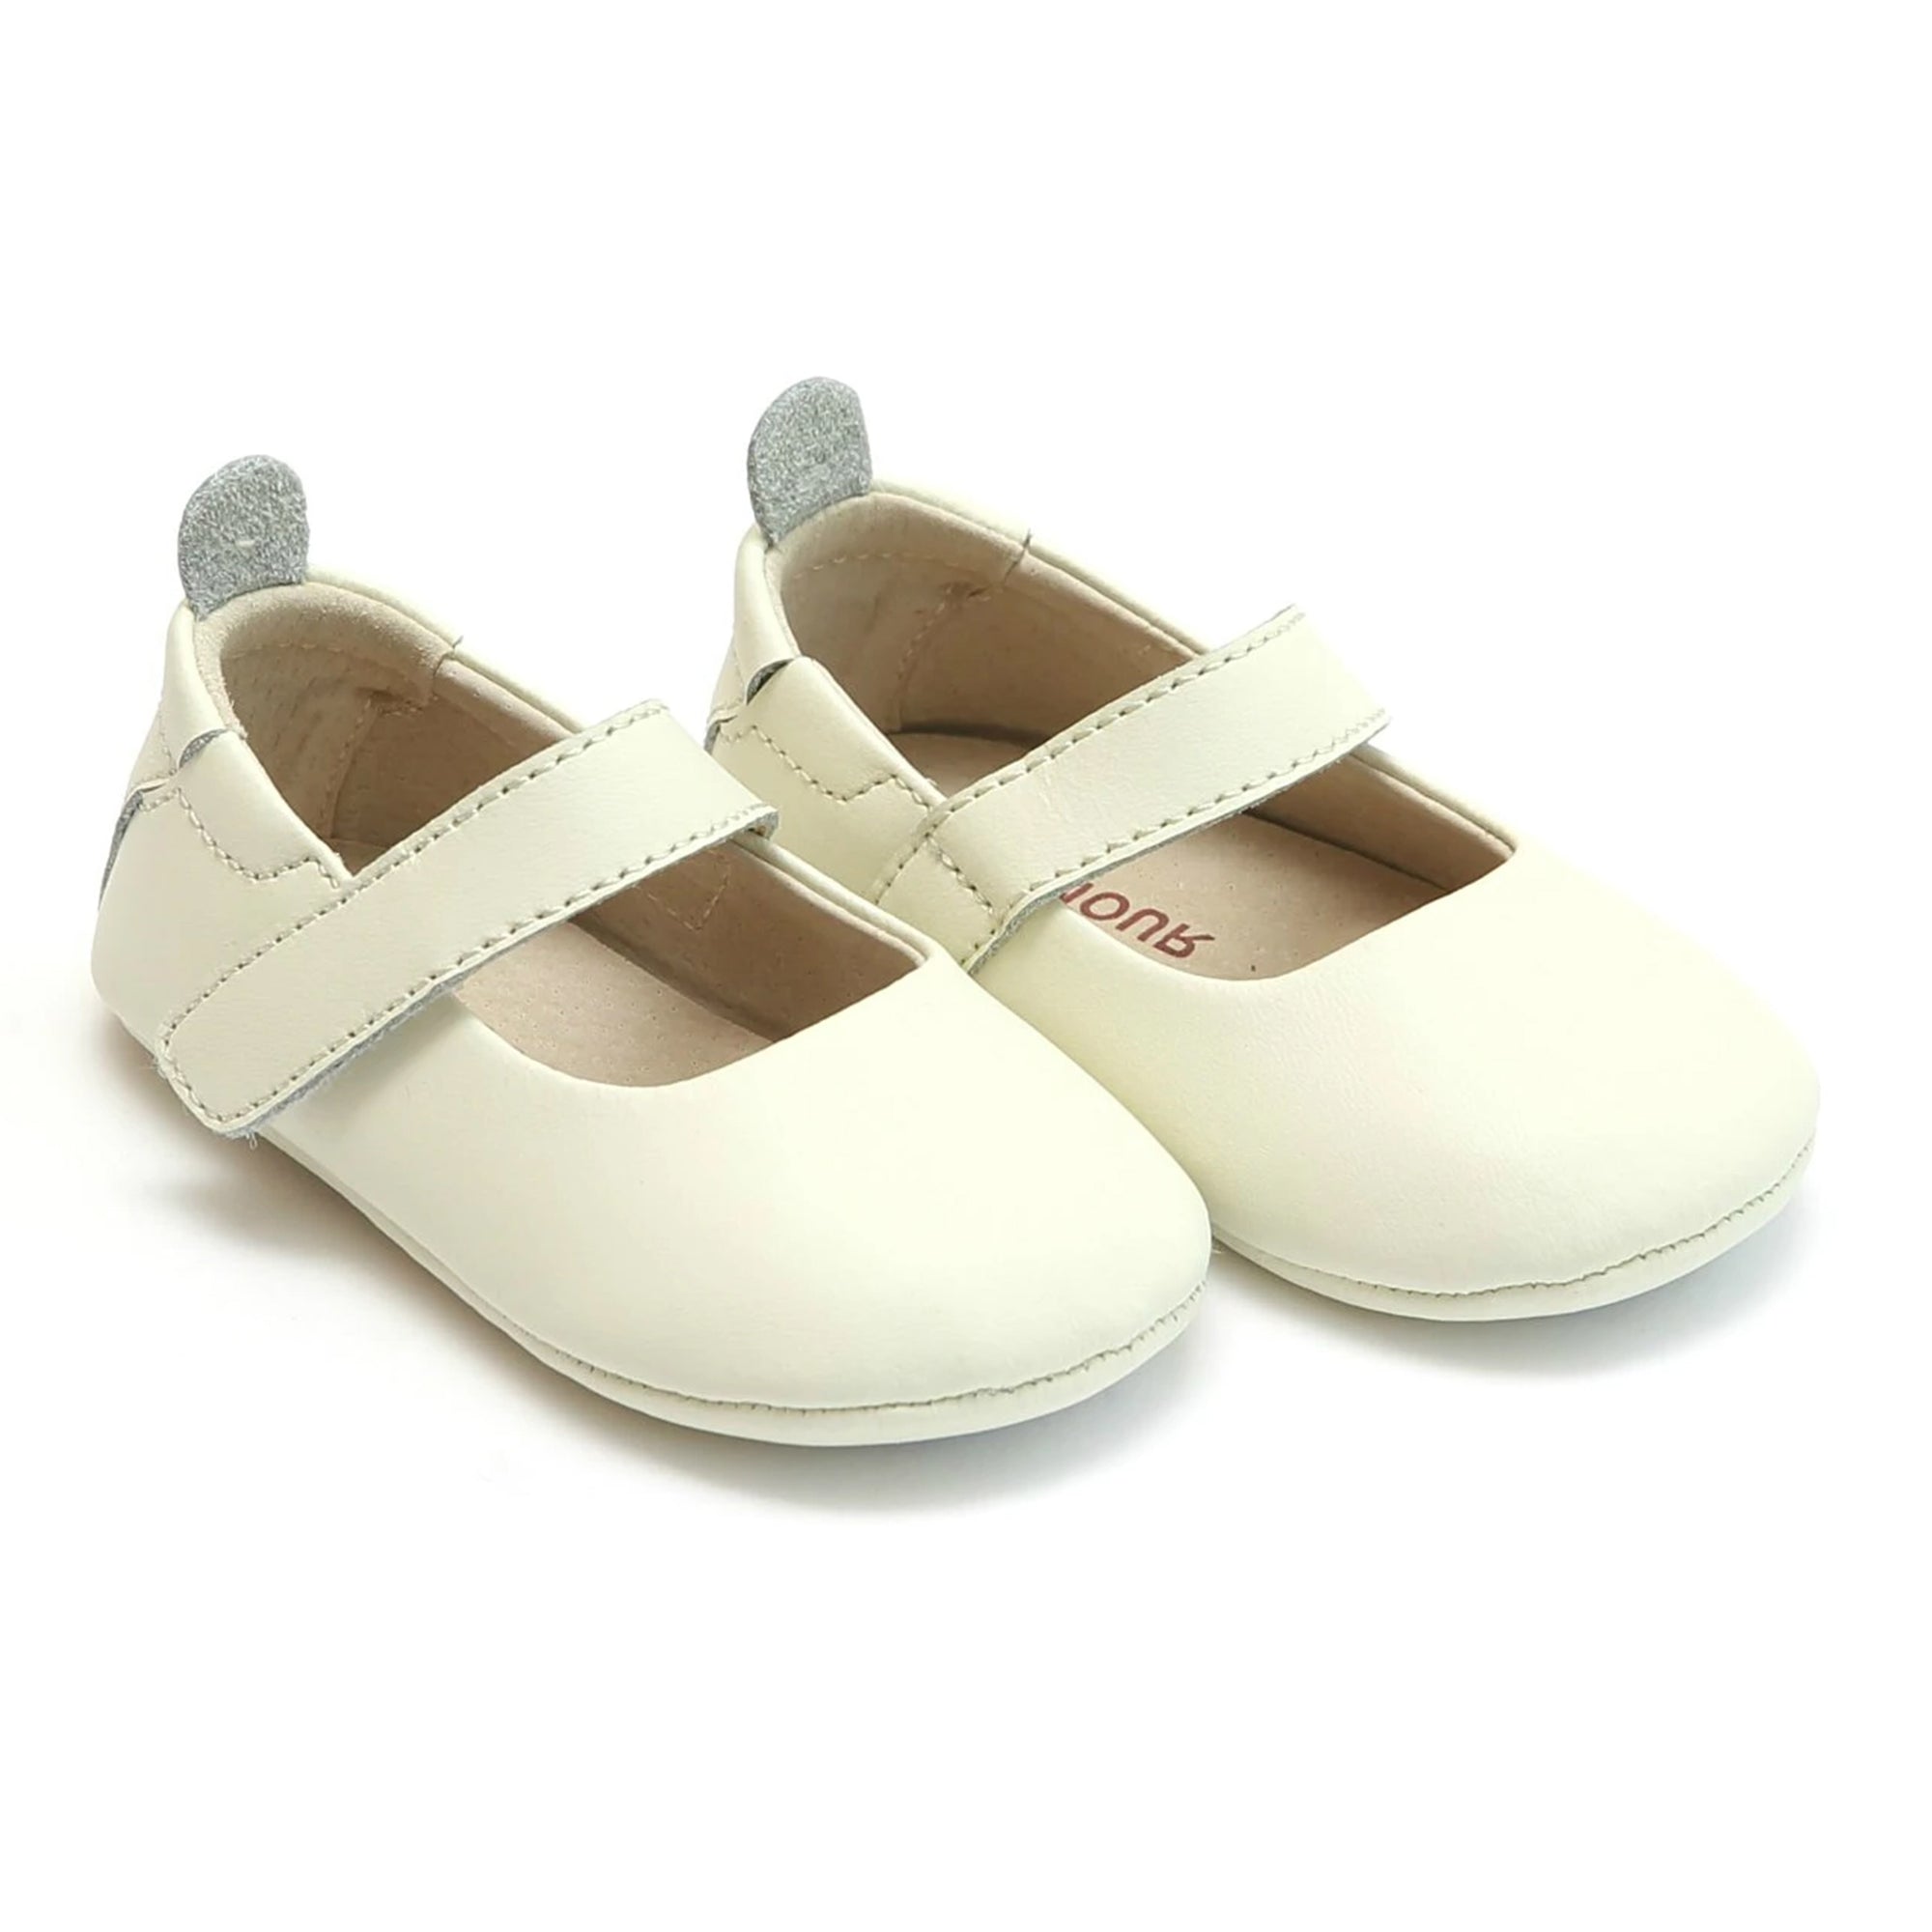 L'Amour Cream Charlotte Baby Girl's Mary Jane Crib Shoes